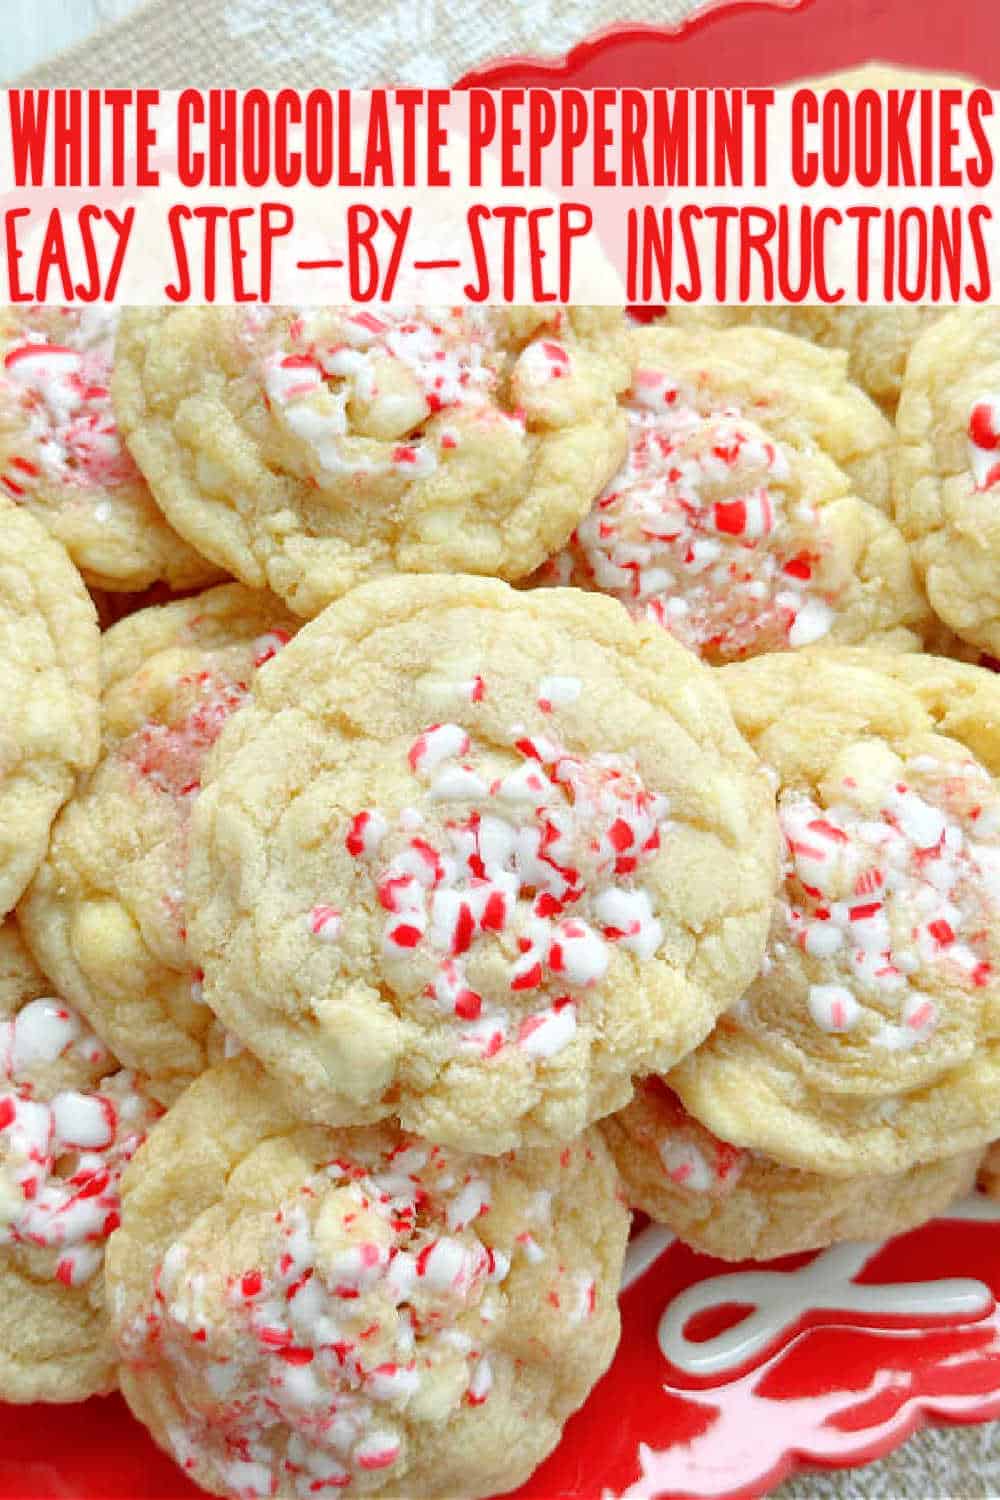 My White Chocolate Peppermint Cookies are famous. Crushed candy canes and white chocolate chips combine for the best Christmas cookie! via @foodtasticmom